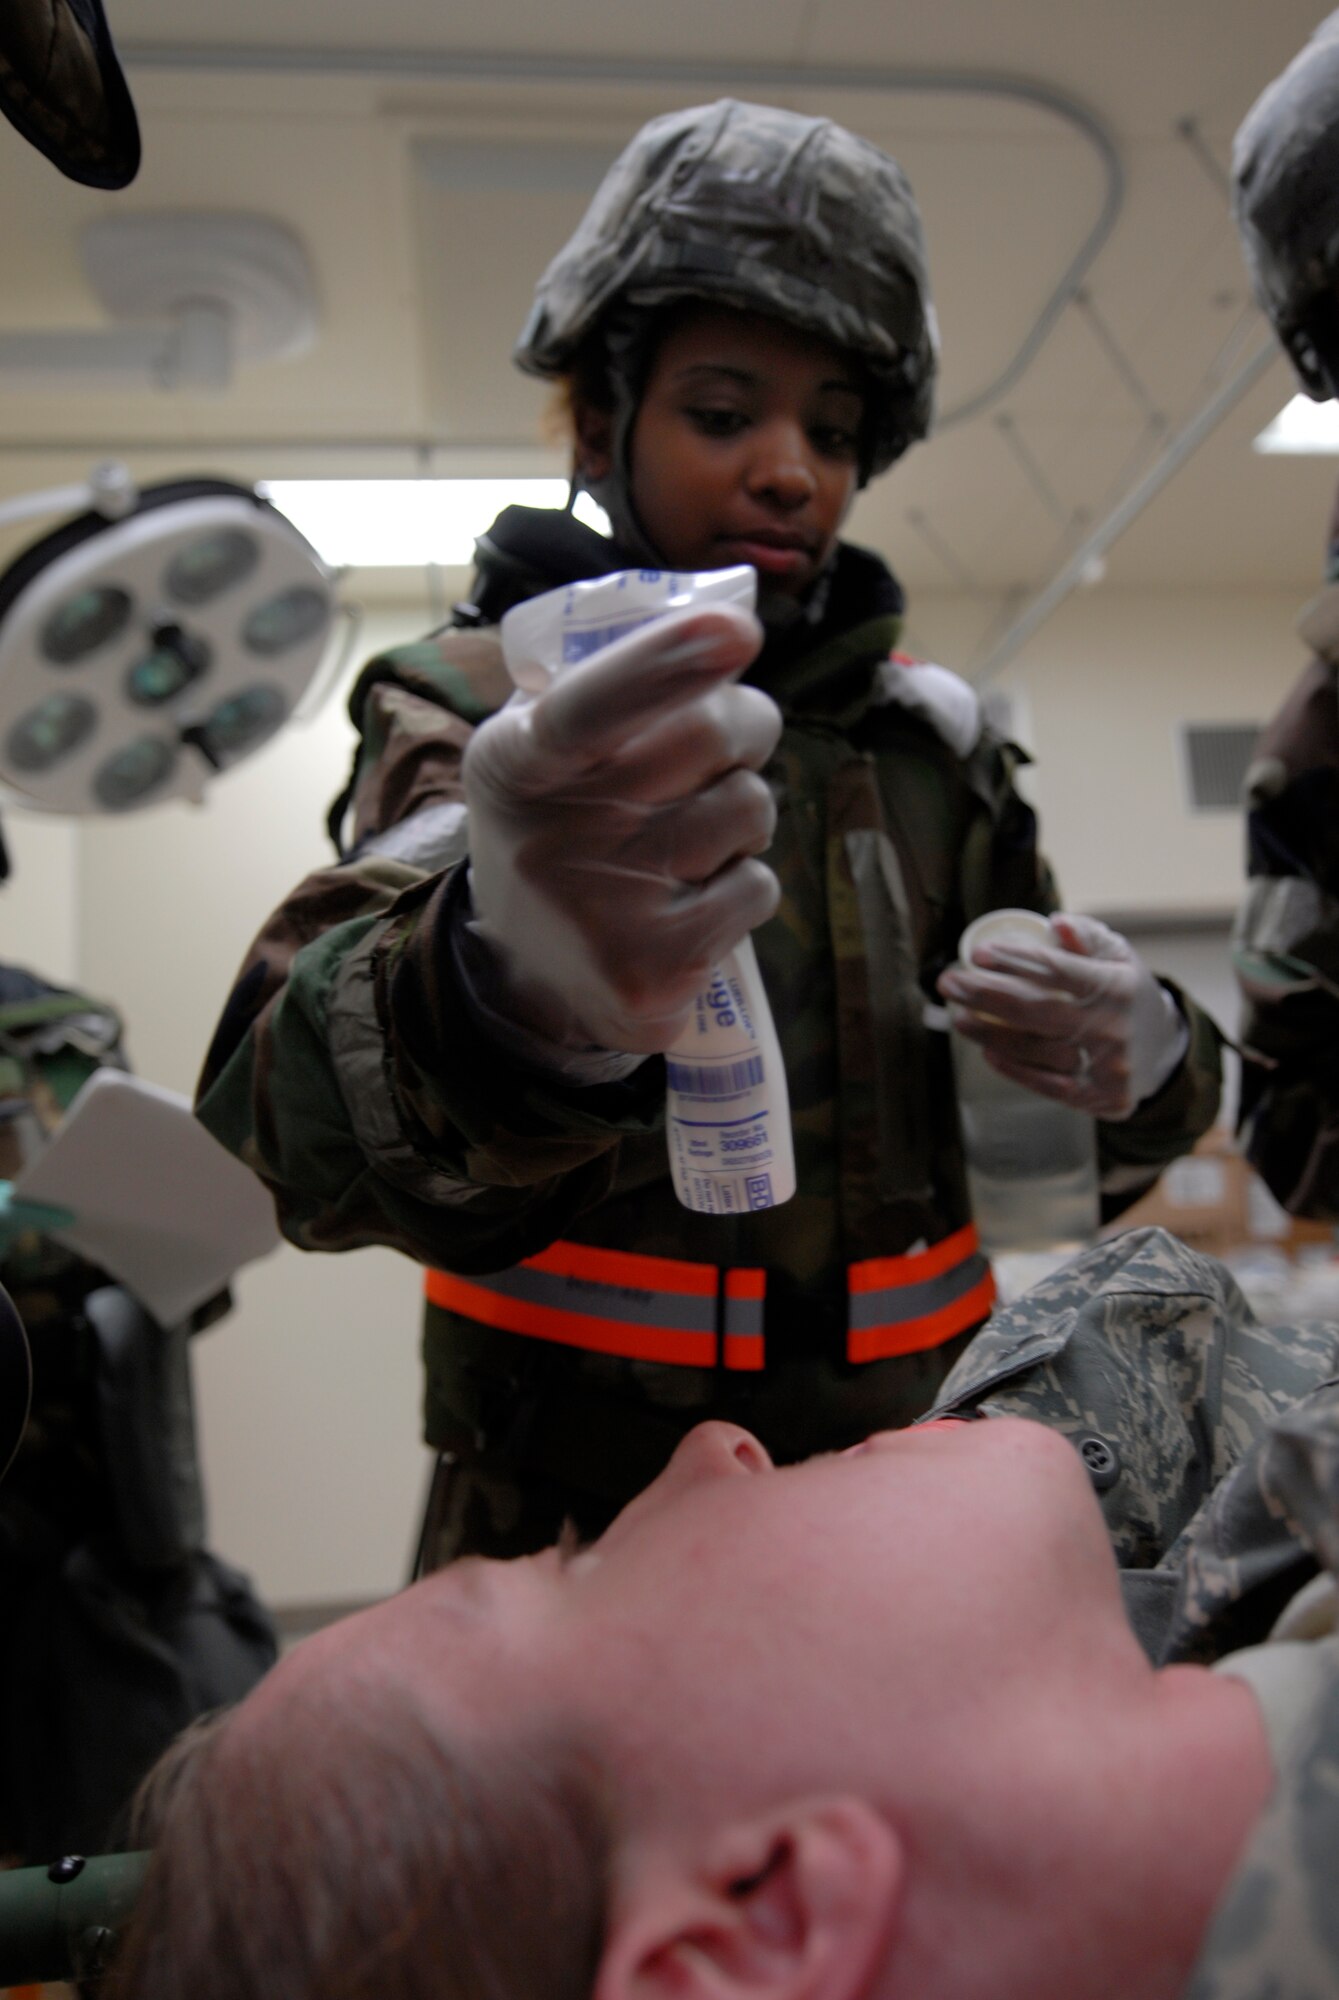 Captain Gregory Skochko from the 18th Medical Group treats a simulated chemical burn during exercise Beverly High 10-01 at Kadena Air Base Oct. 20. The 18th Wing is participating in a Local Operational Readiness Exercise to test the readiness of Kadena Airmen Oct. 19-23. (U.S. Air Force photo / Airman 1st Class Chad Warren)